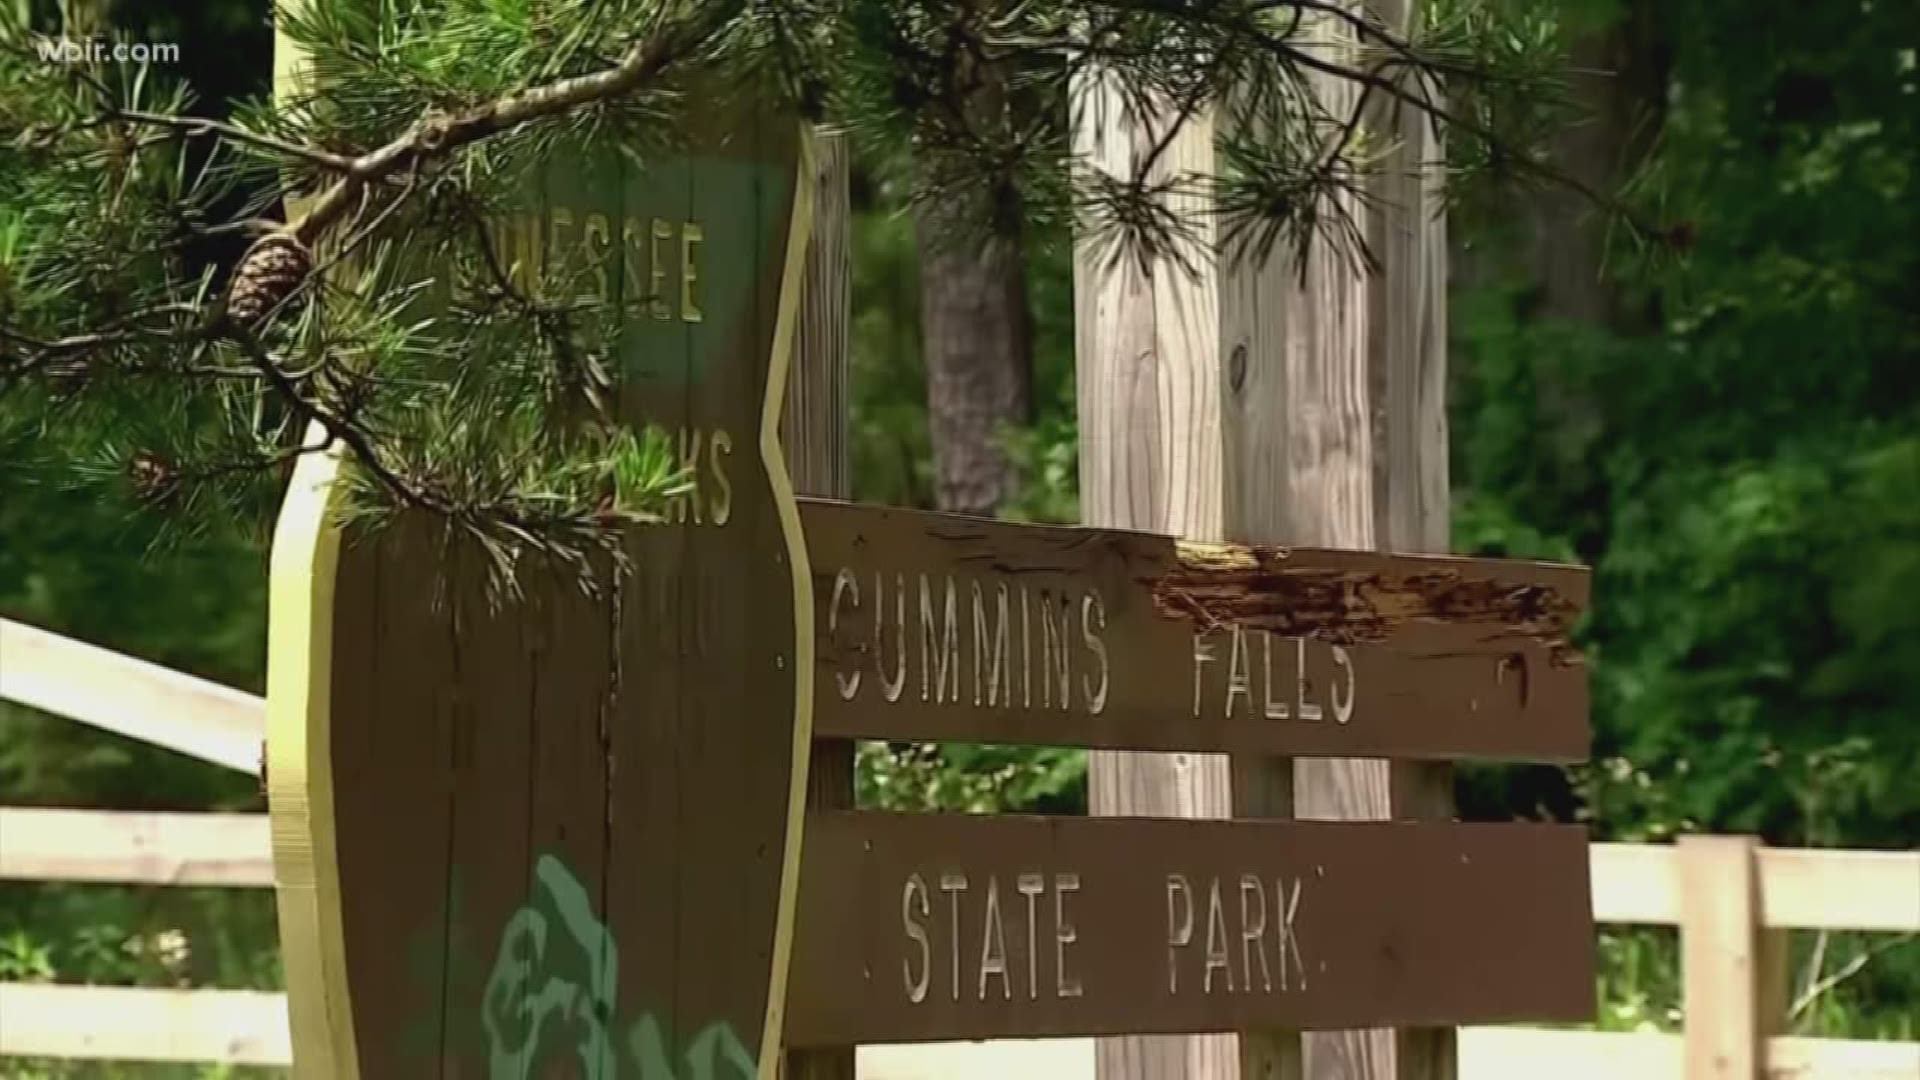 The Tennessee Department of Environment and Conservation met yesterday to talk about implementing warning systems at Cummins Falls. State leaders say they're acting on demands to make the park safer.